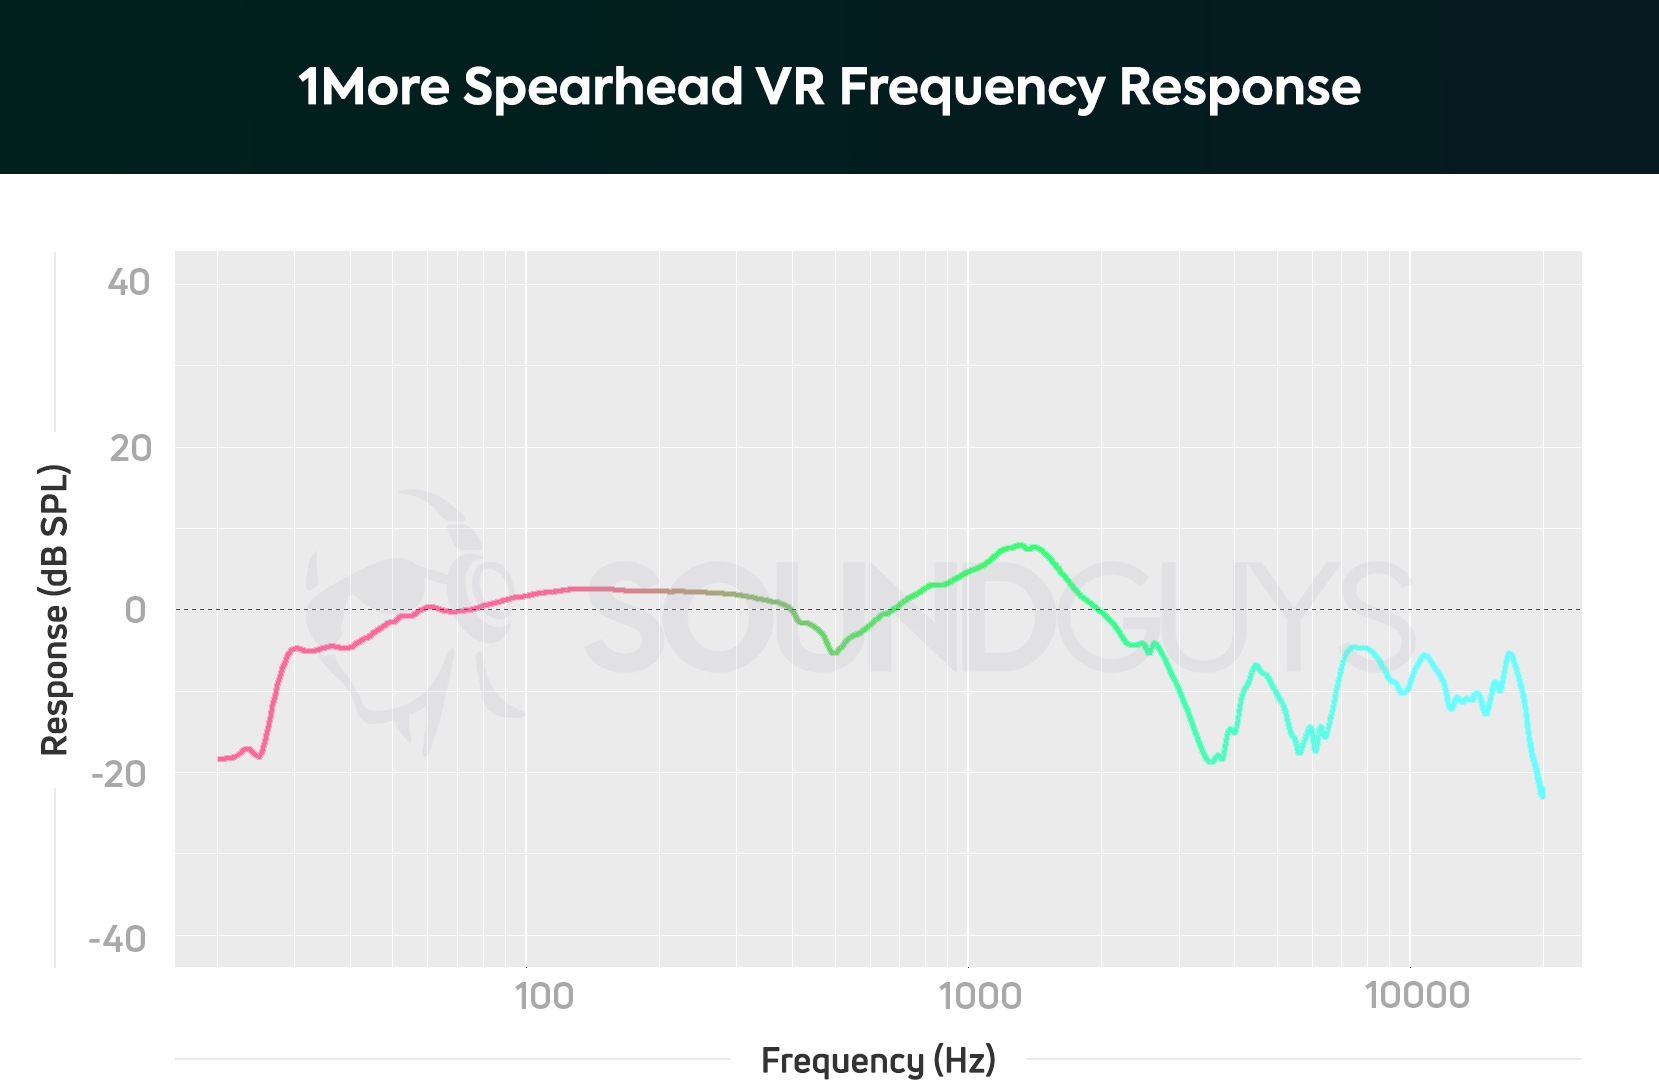 A frequency response chart for the 1More Spearhead VR gaming headset, which shows consistent de-emphasis in high range.